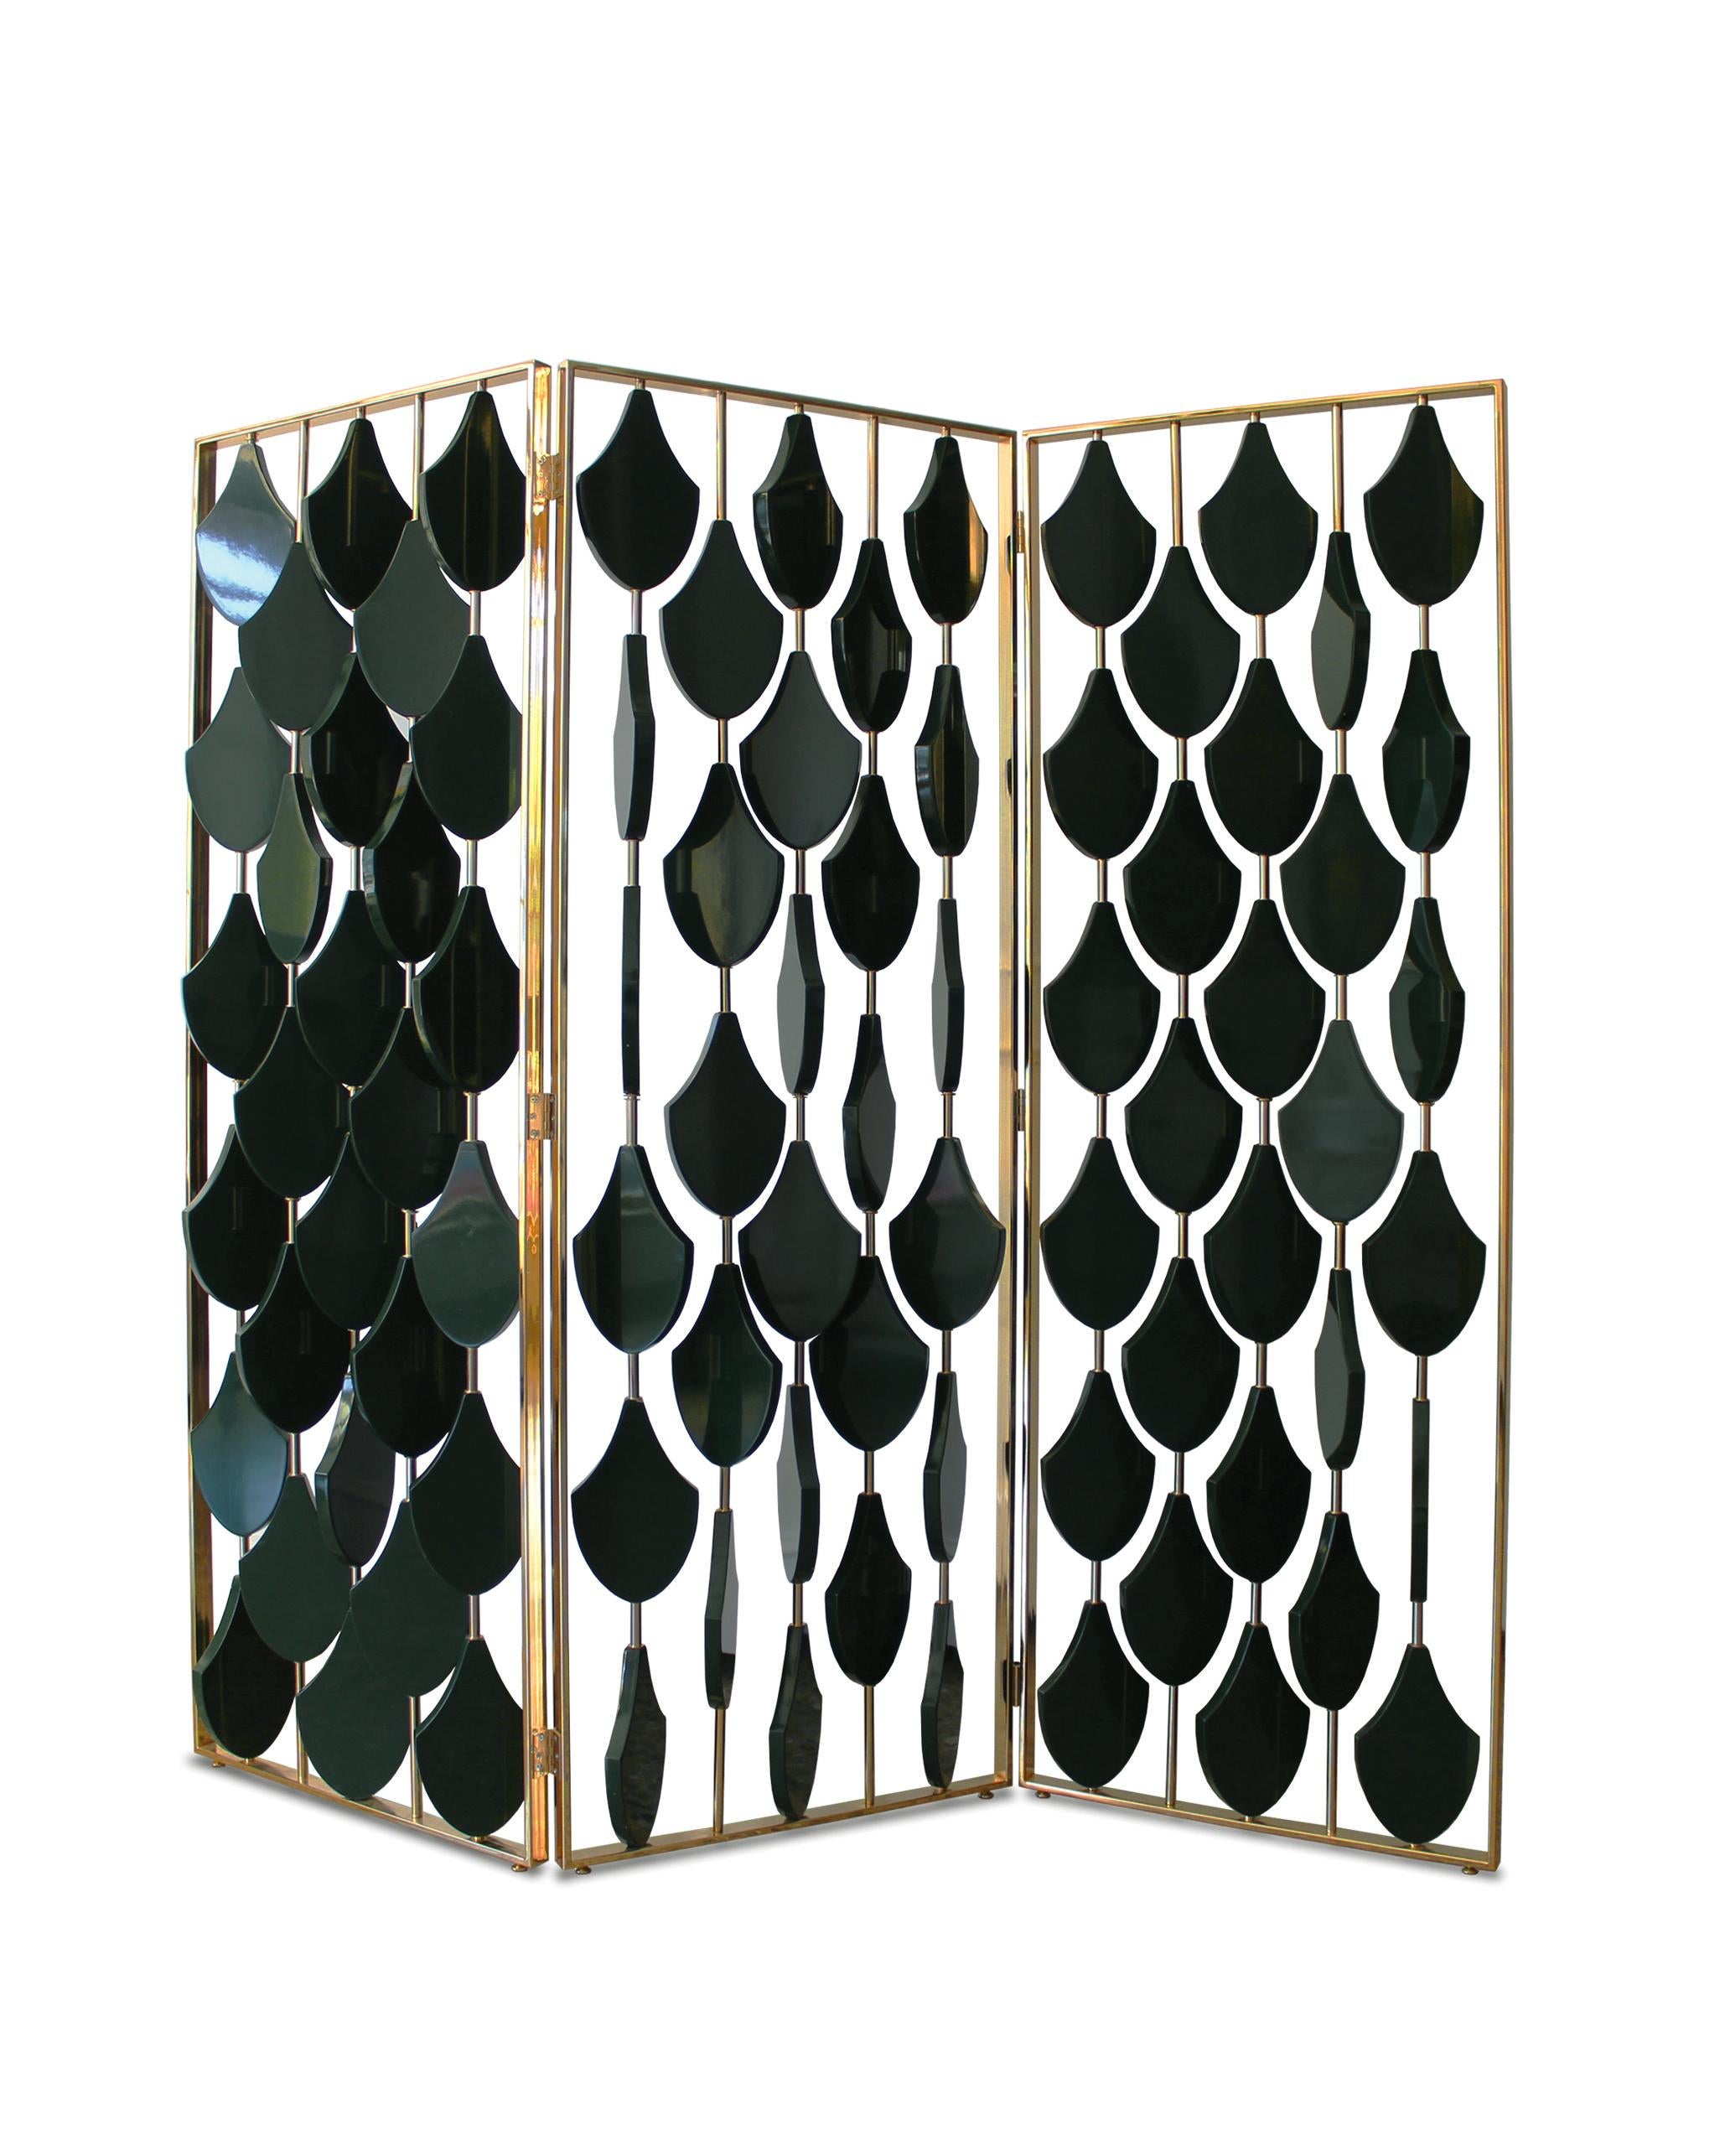 Italian 21st Century Siren Room Divider in Golden Brass and Wood, Made in Italy For Sale